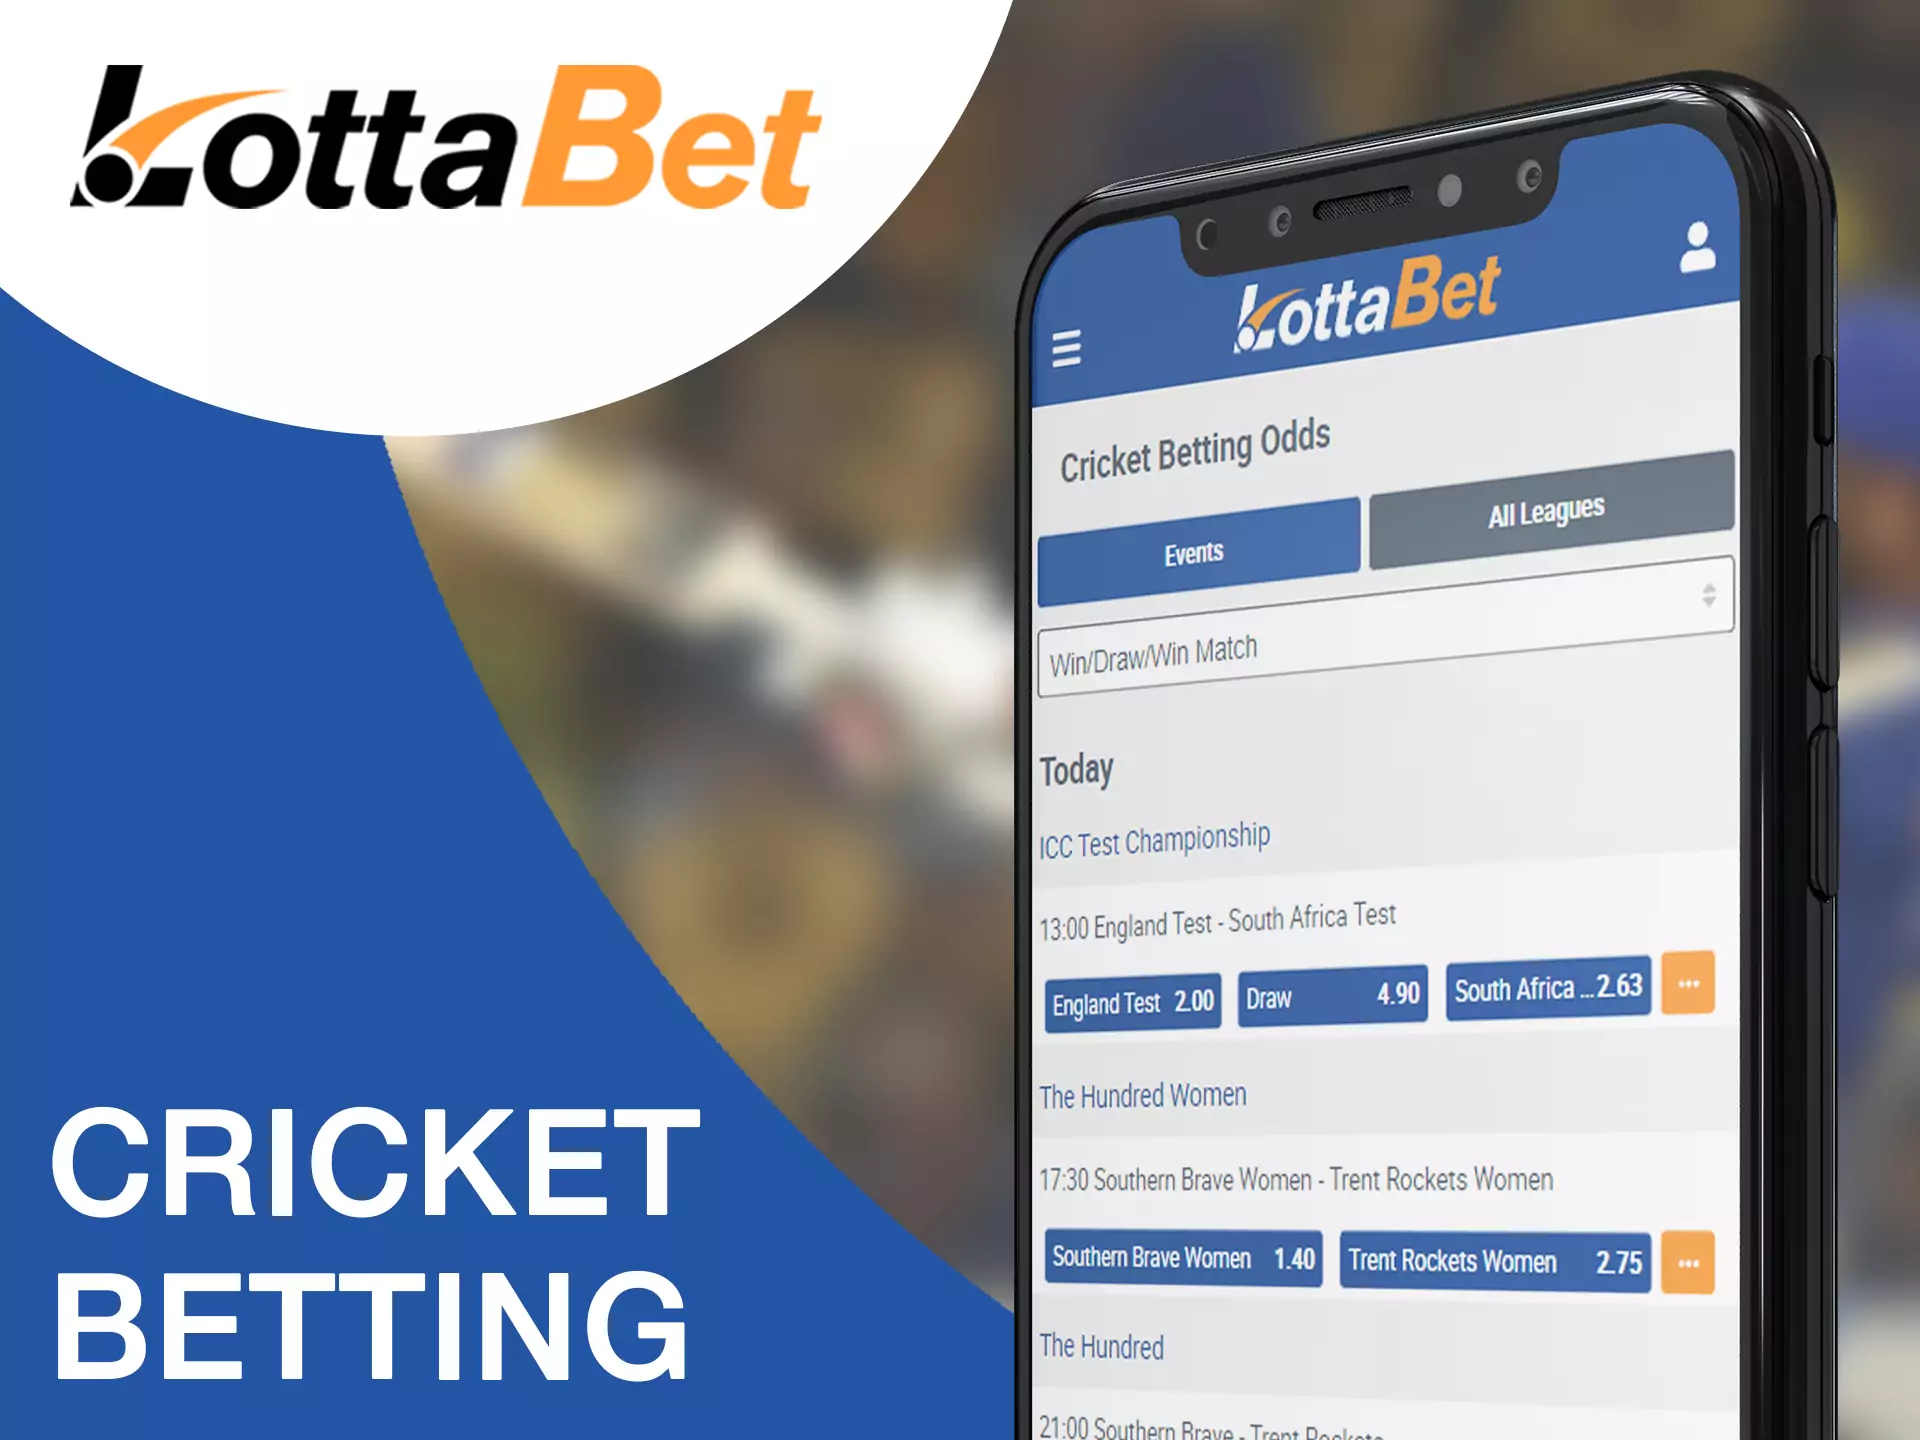 Watch cricket matches and bet on them.